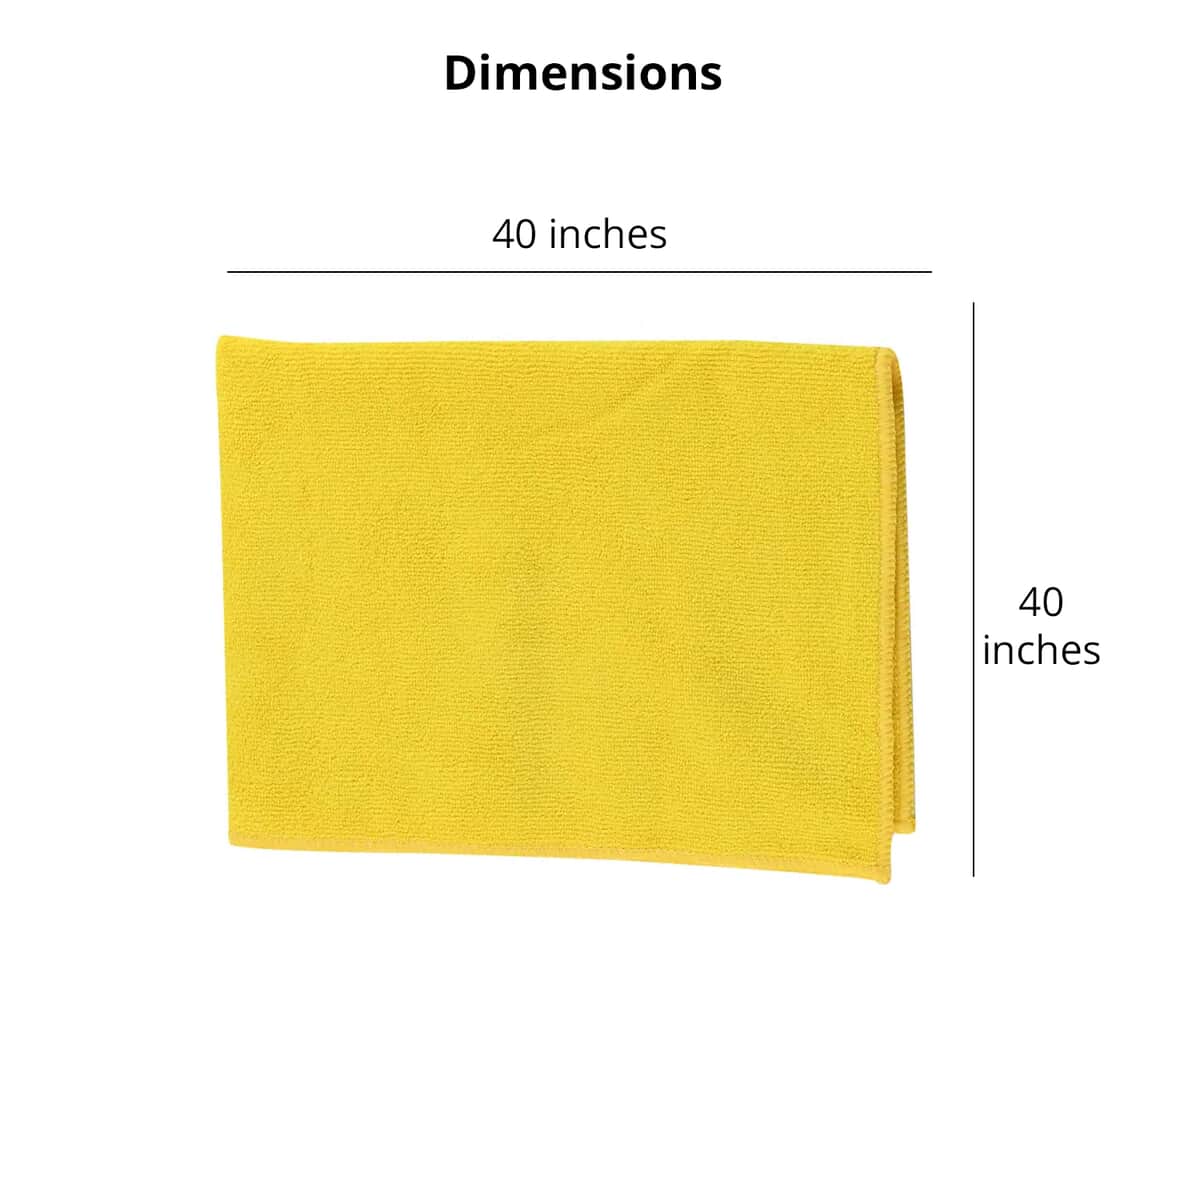 Shelby Yellow Machine Washable, Quick Drying, Reusable, Ultra-Soft Microfiber Wash Cloth With Signature Logo For Home Kitchen Car Bike Laptop Cleaning image number 5